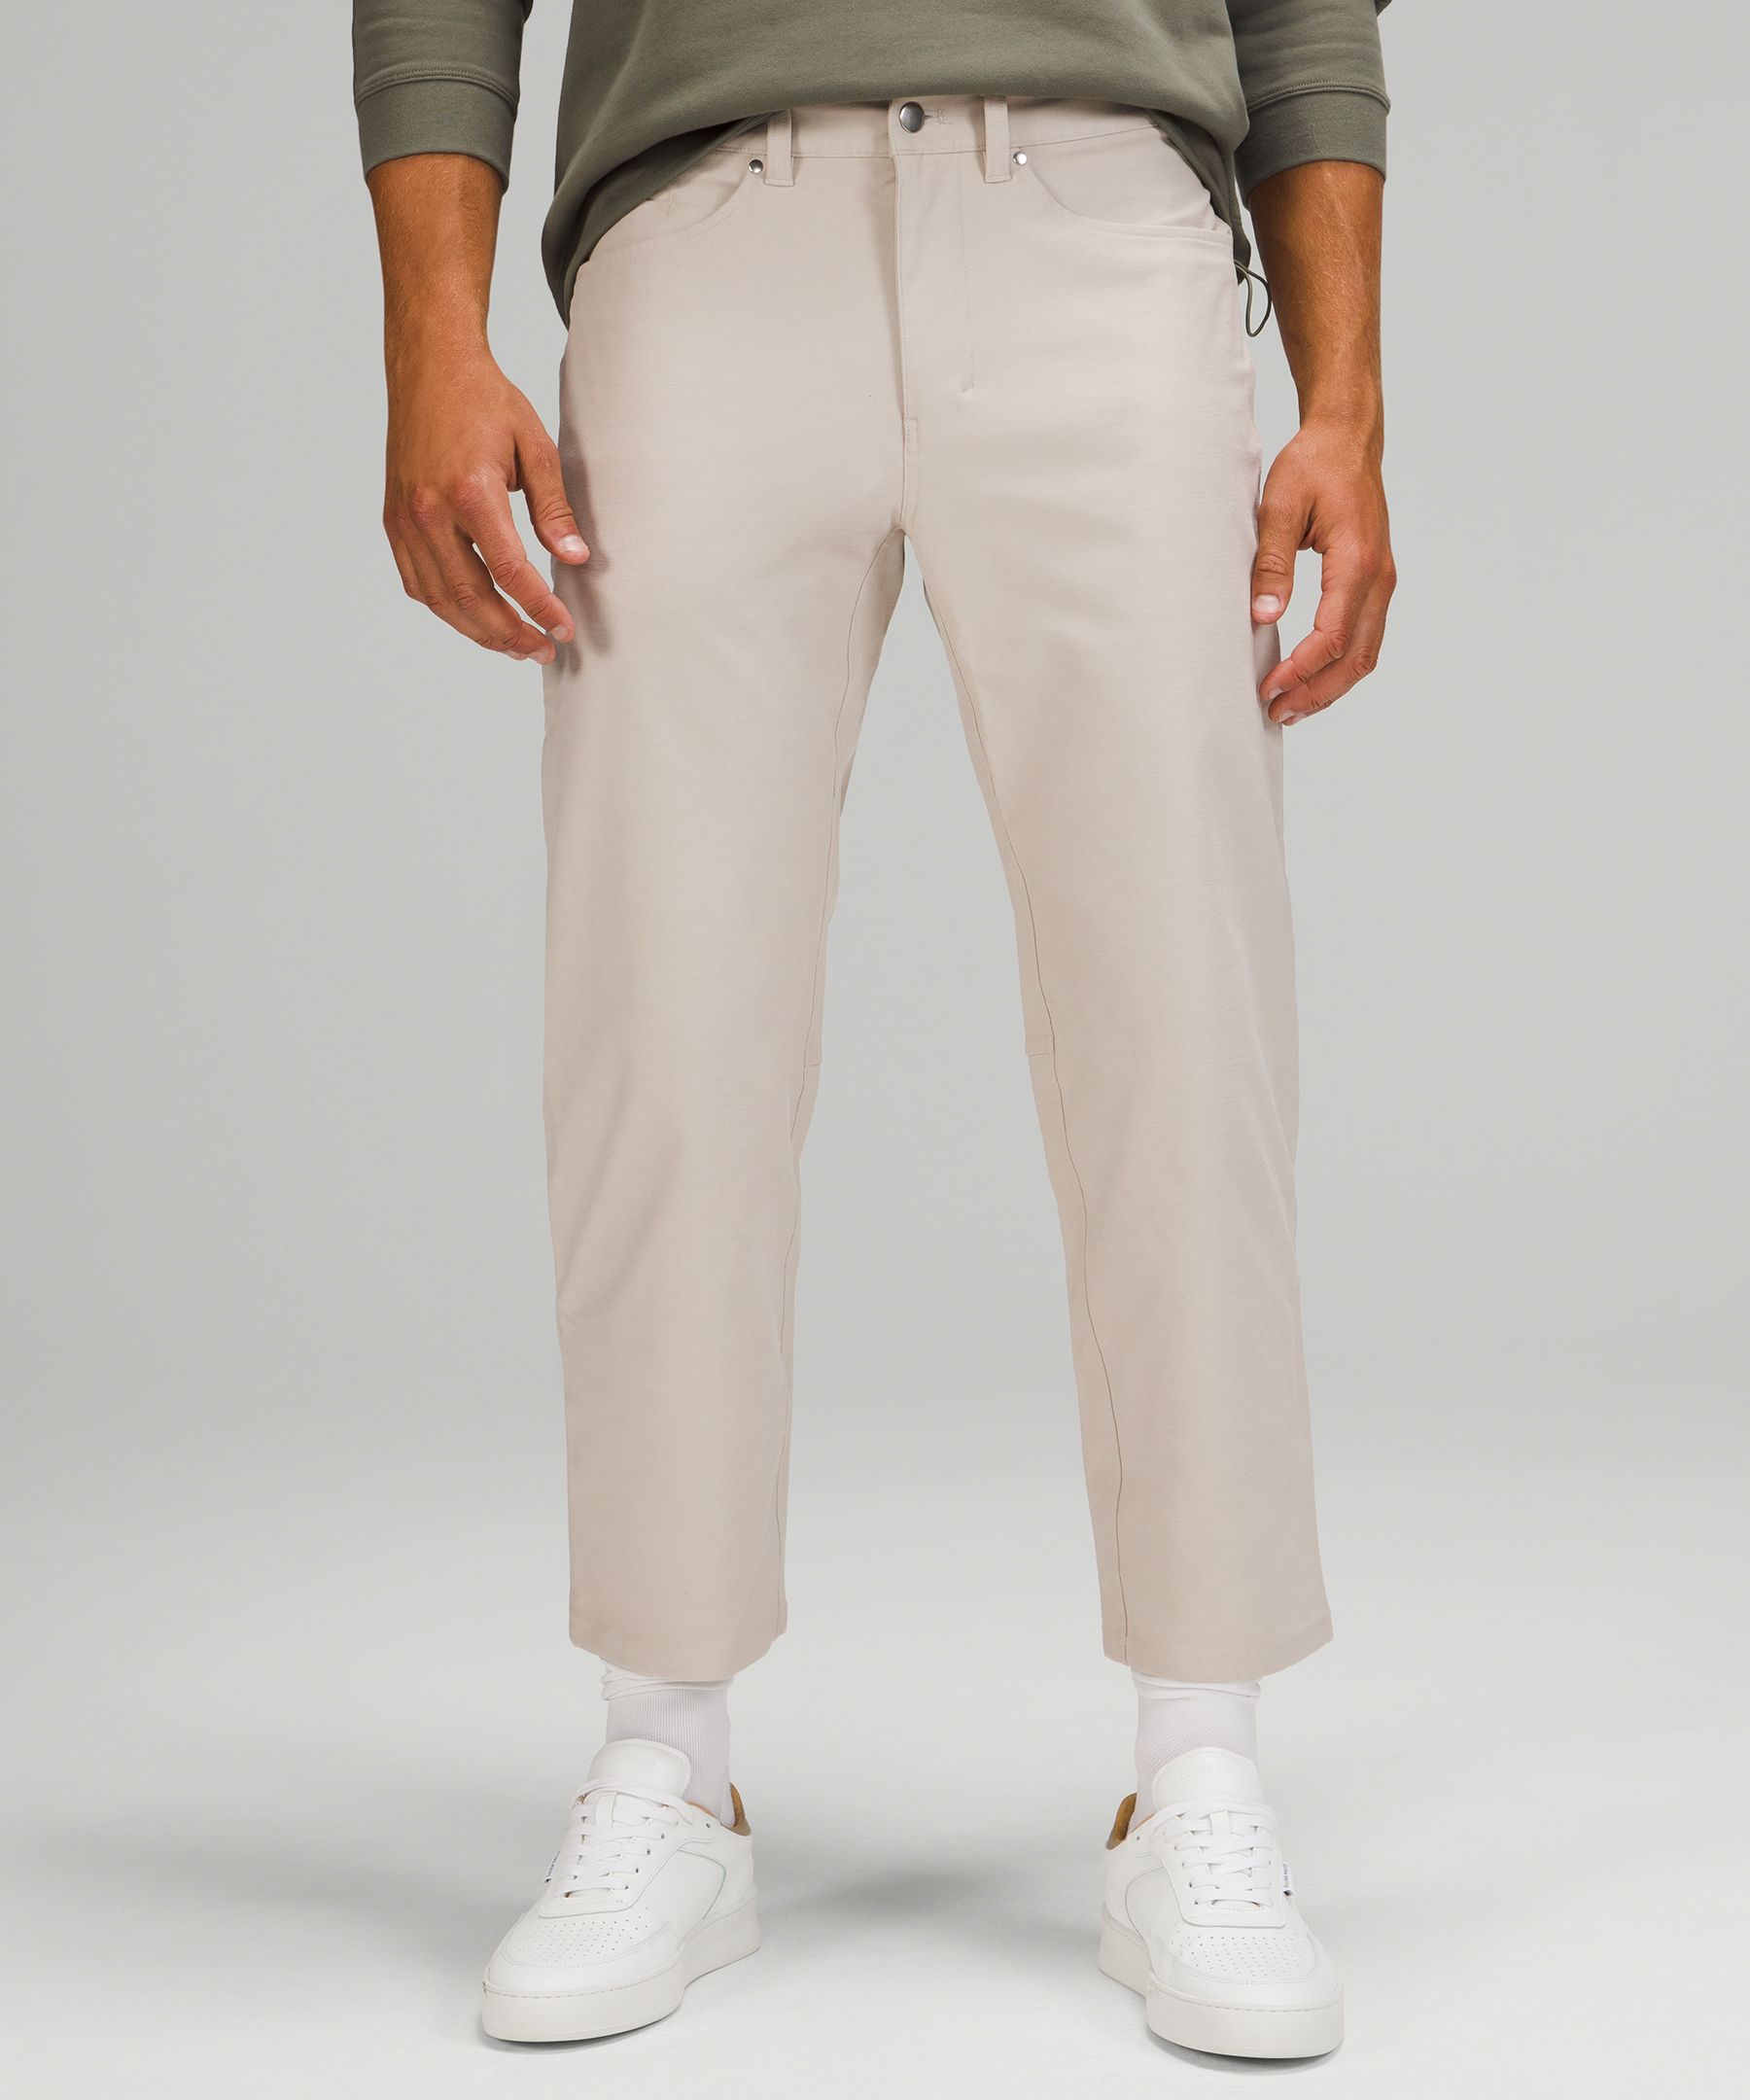 Lululemon Abc Relaxed-fit Crop Pants Utilitech In Dove Grey | ModeSens